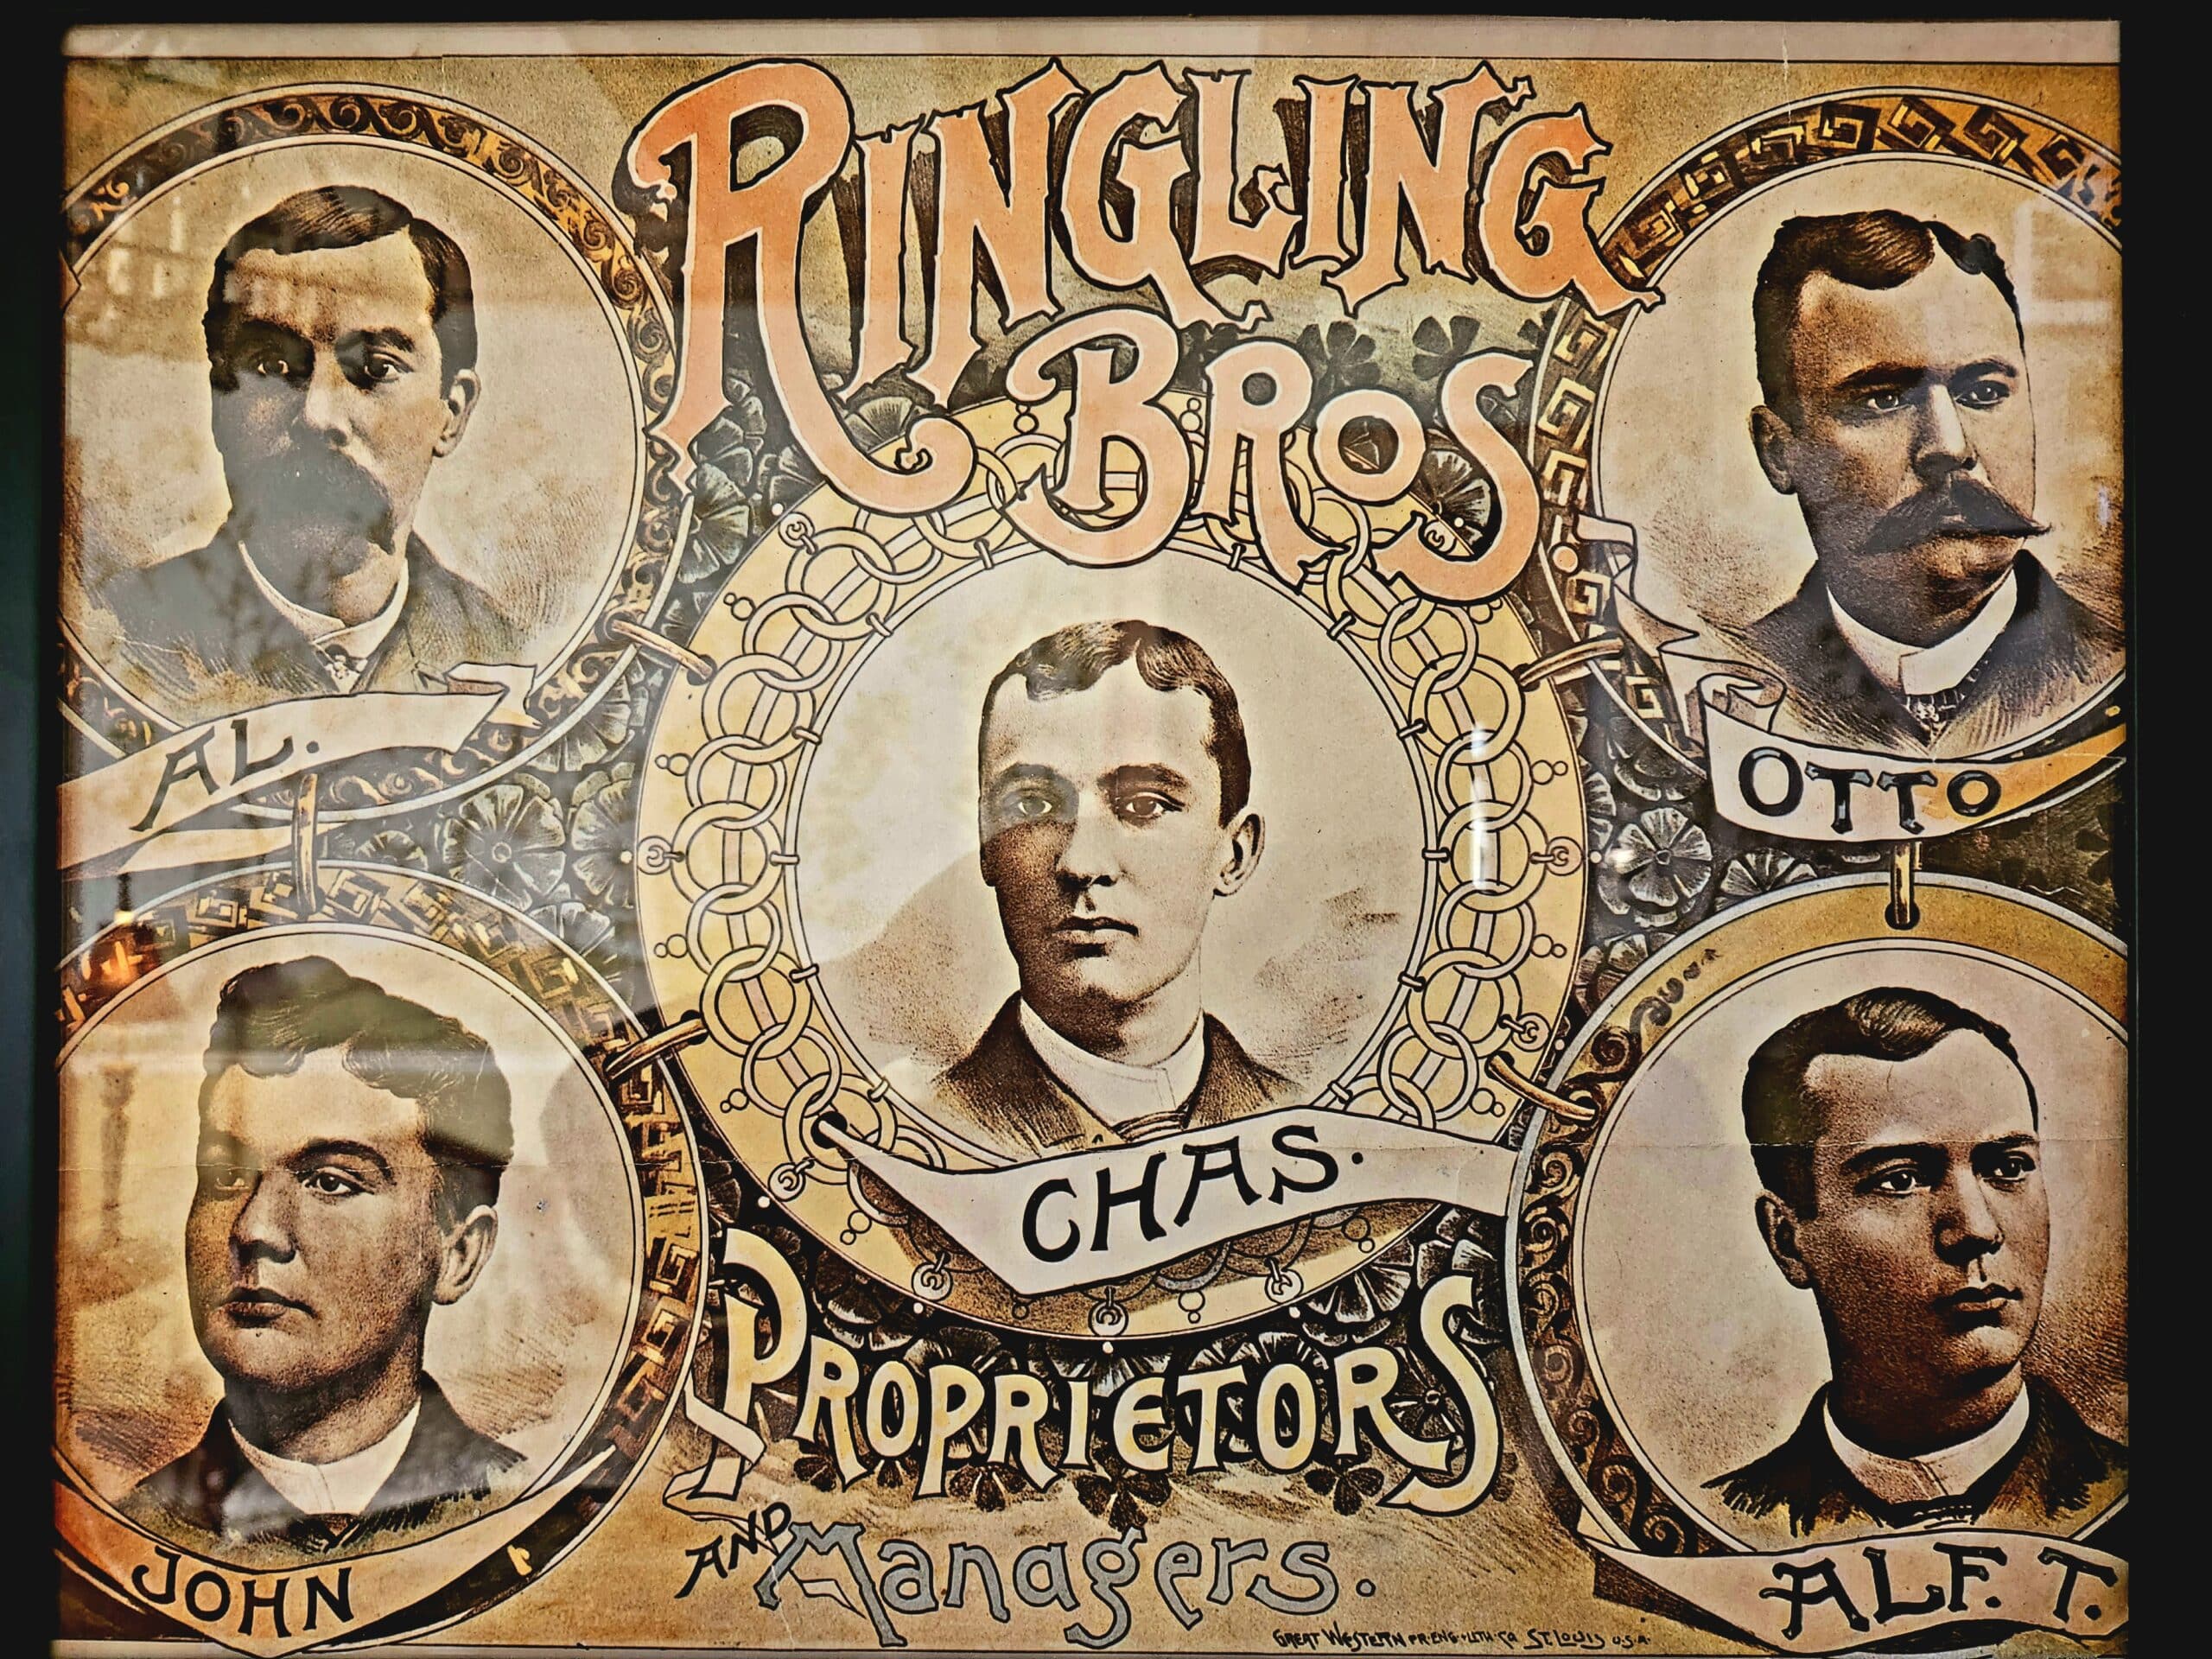 Ringling Brothers Cicus Poster with 5 Brothers